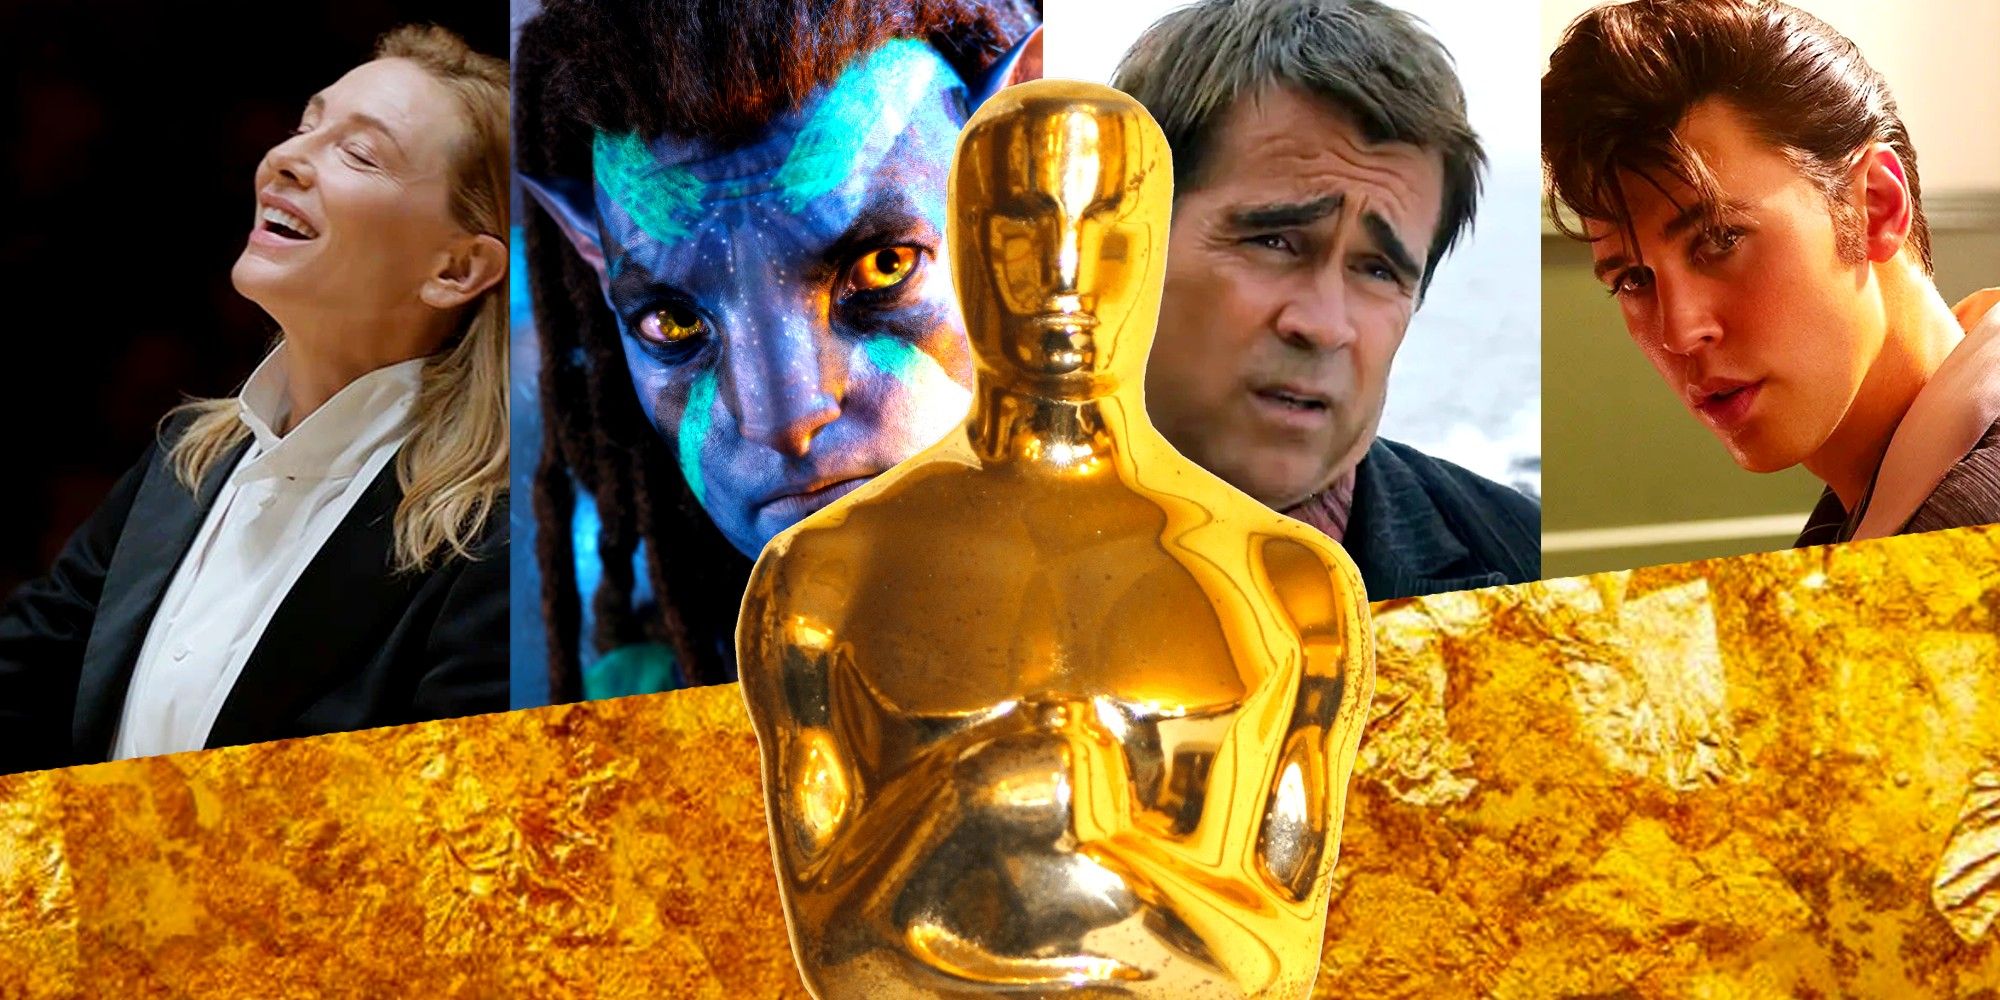 The Oscars 2023 Best Films nominees and Oscar statue